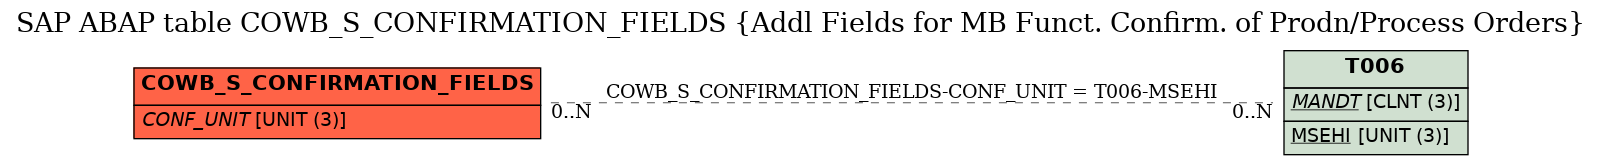 E-R Diagram for table COWB_S_CONFIRMATION_FIELDS (Addl Fields for MB Funct. Confirm. of Prodn/Process Orders)